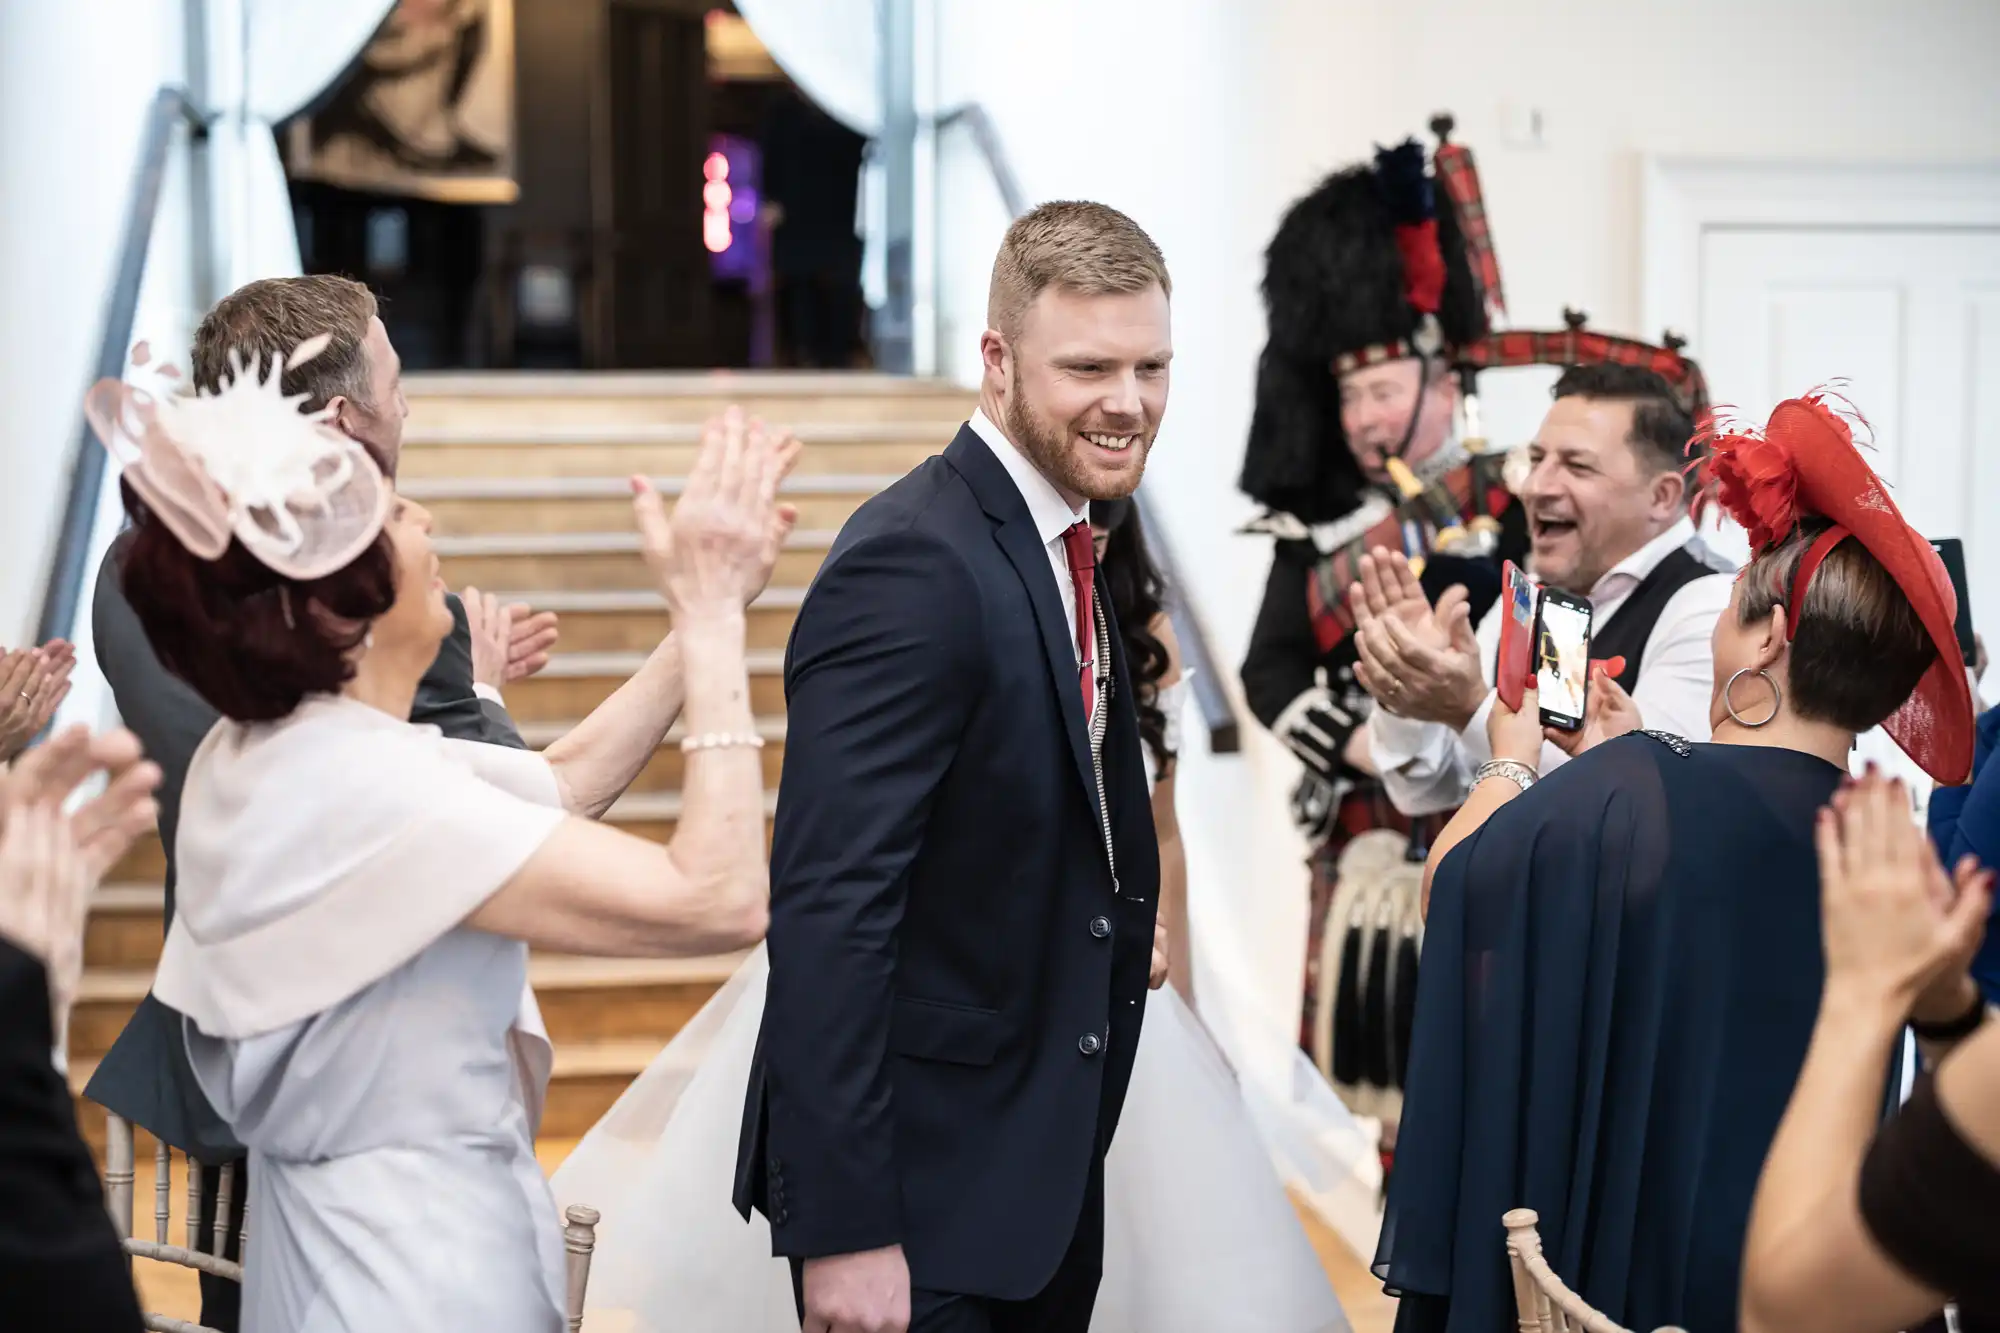 A man in a suit smiles while walking down an aisle with people clapping on either side. Some are taking photos, and a person in traditional Scottish attire is playing bagpipes.